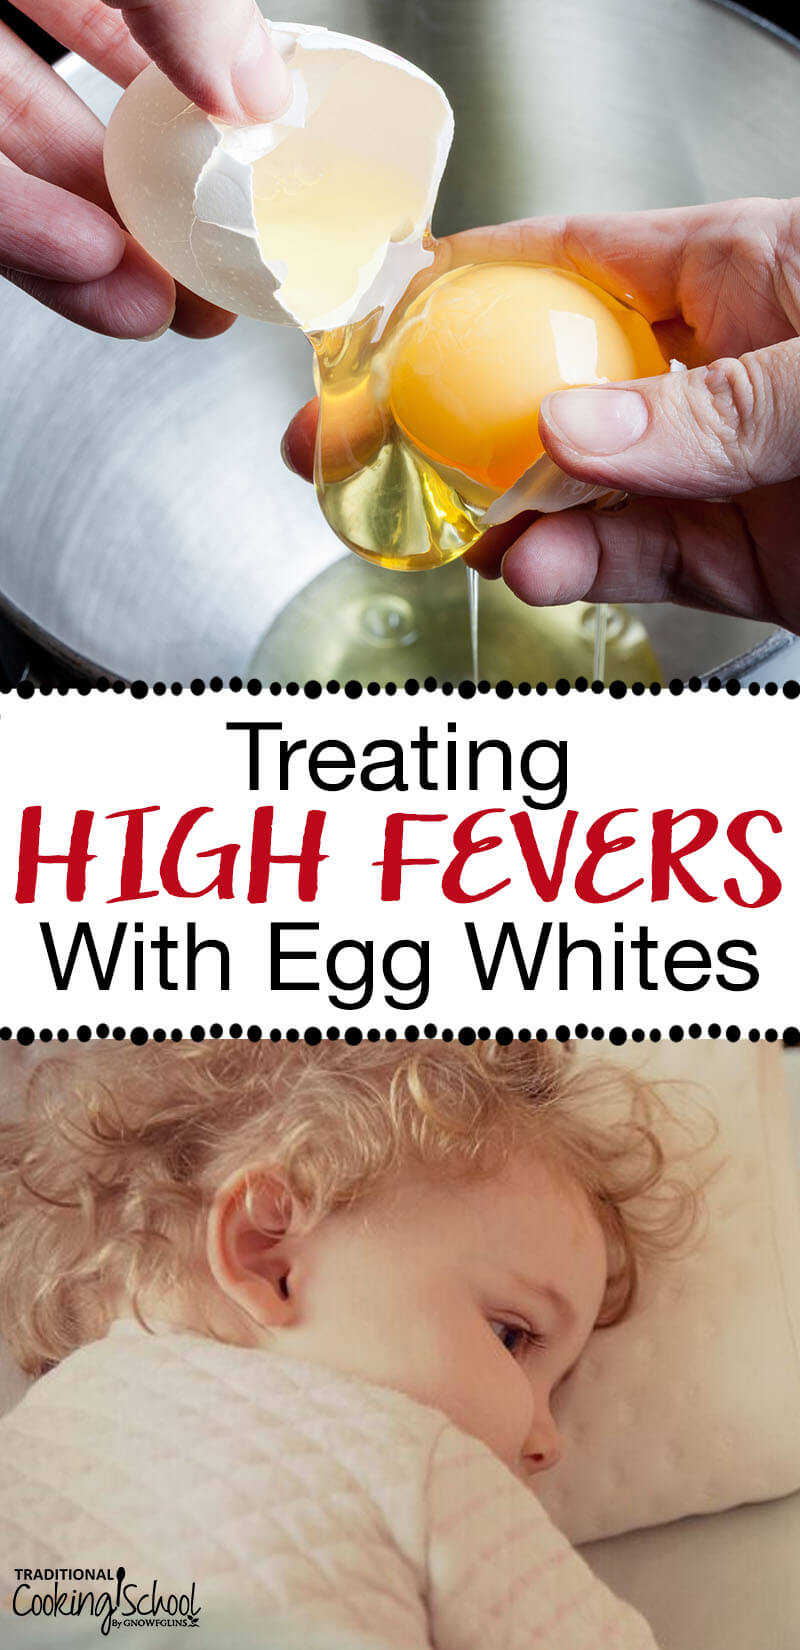 Treating High Fevers With Egg Whites | Parents are told to reduce their kids' fevers with aspirin or other medicines. For a mild fever, this can do more harm than good. Here's a natural fever remedy you may not have heard of... egg whites! | TraditionalCookingSchool.com